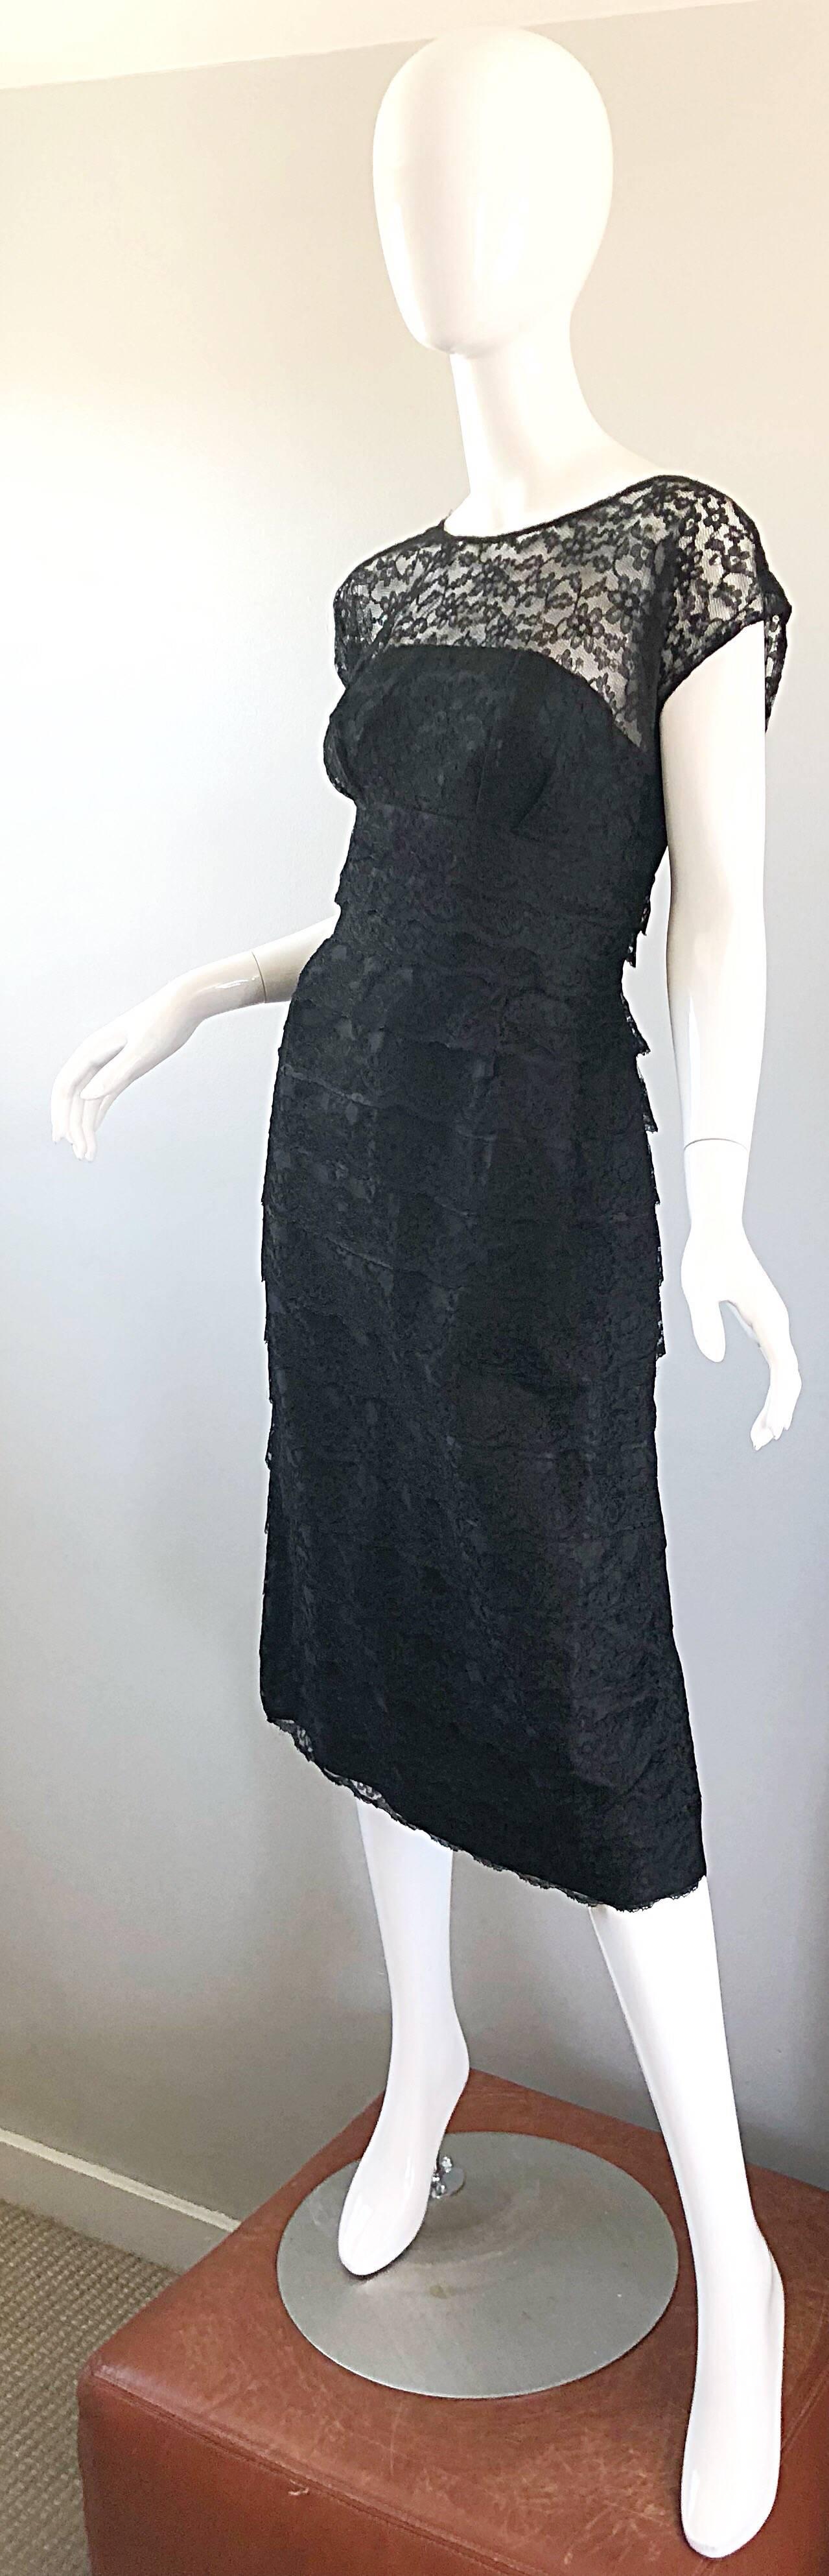 Chic 1950s Demi Couture Black French Lace Nude Illusion Vintage 50s Silk Dress In Excellent Condition For Sale In San Diego, CA